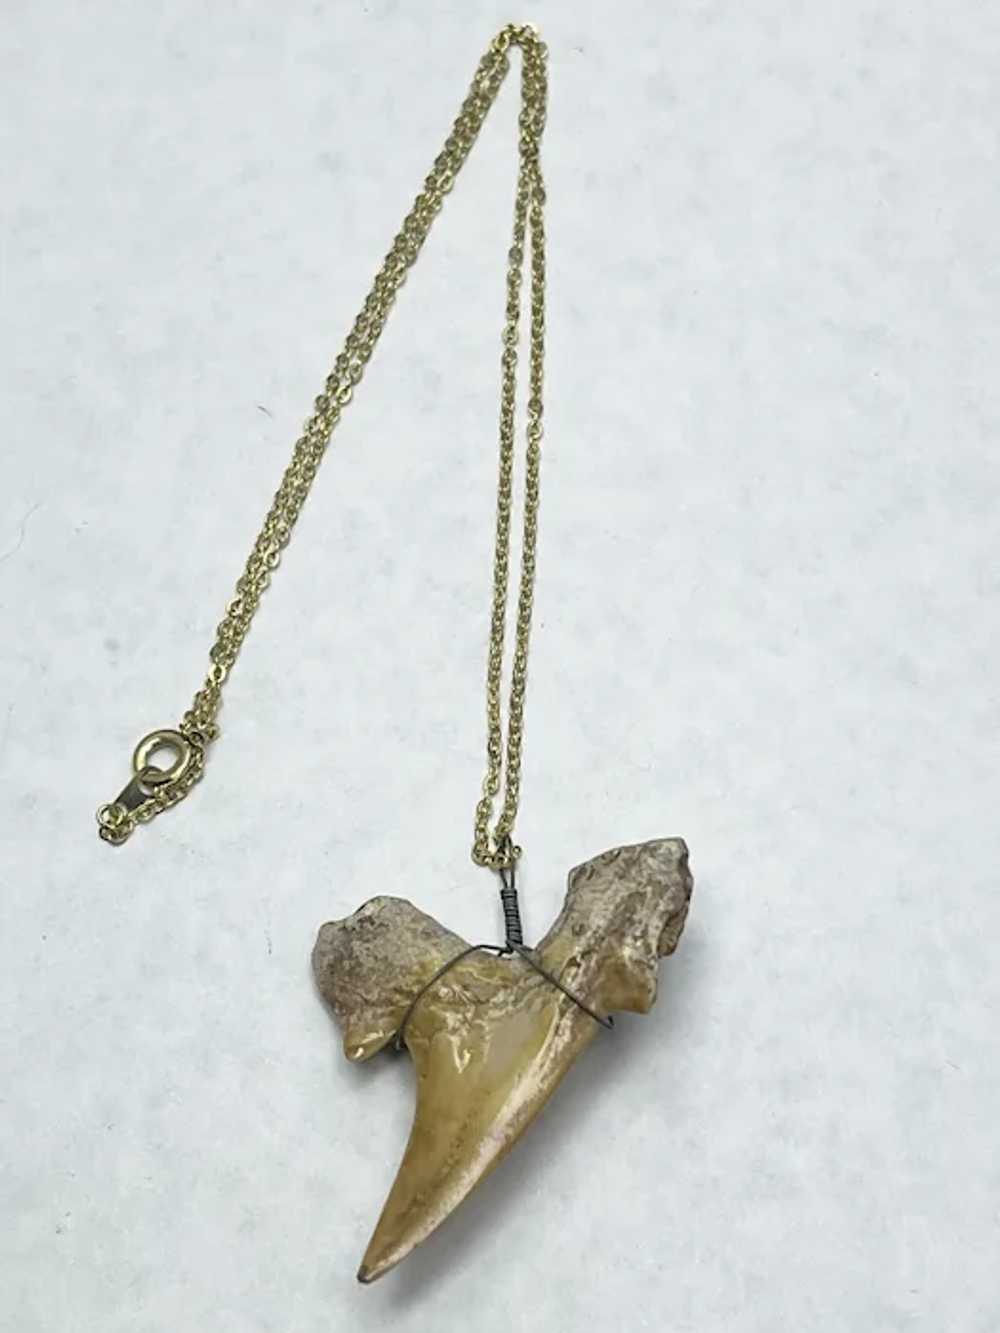 Vintage Shark Tooth Pendant Necklace - image 2